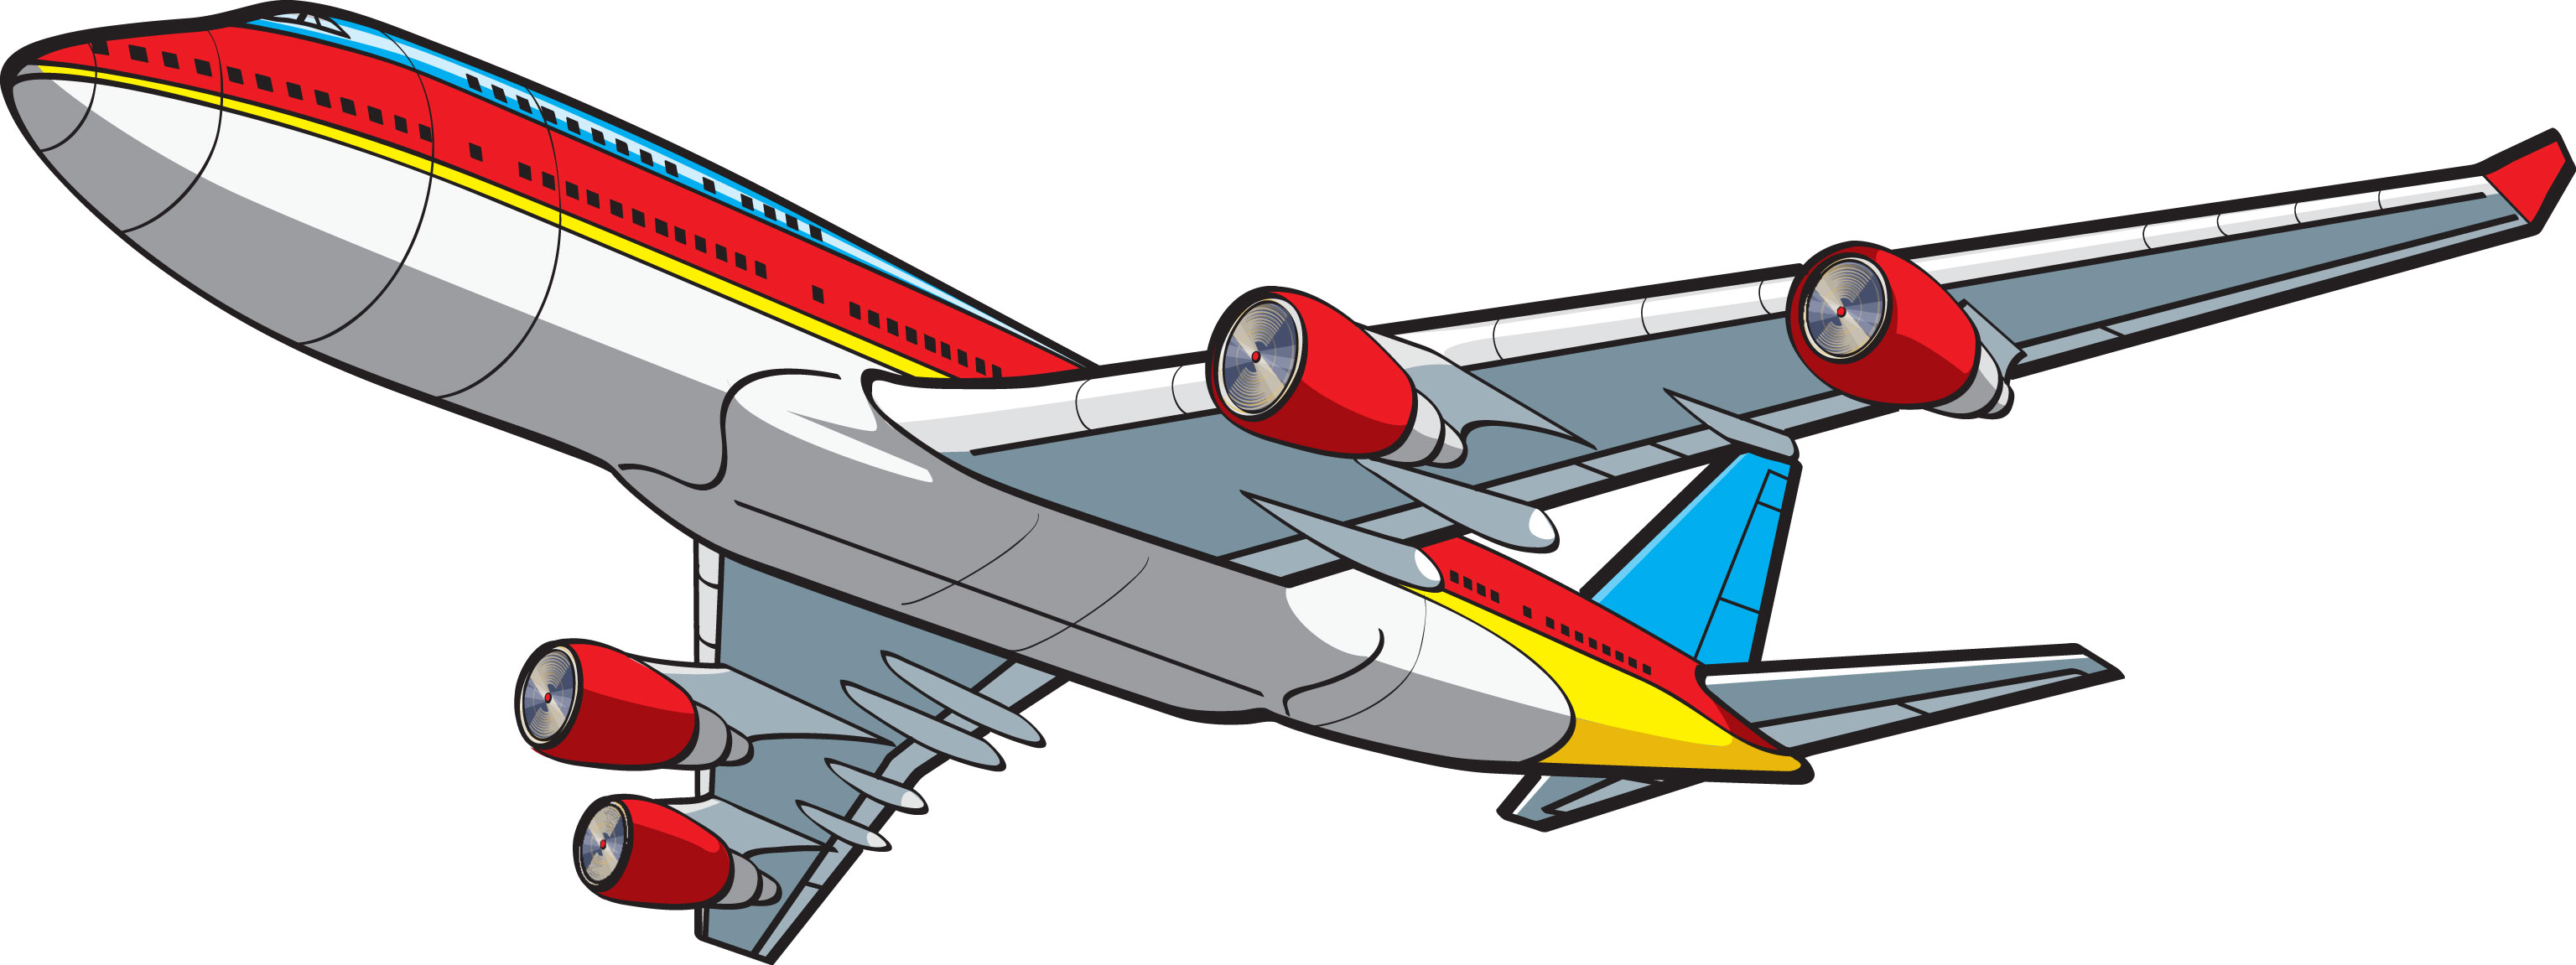 free clipart airplane images - photo #46